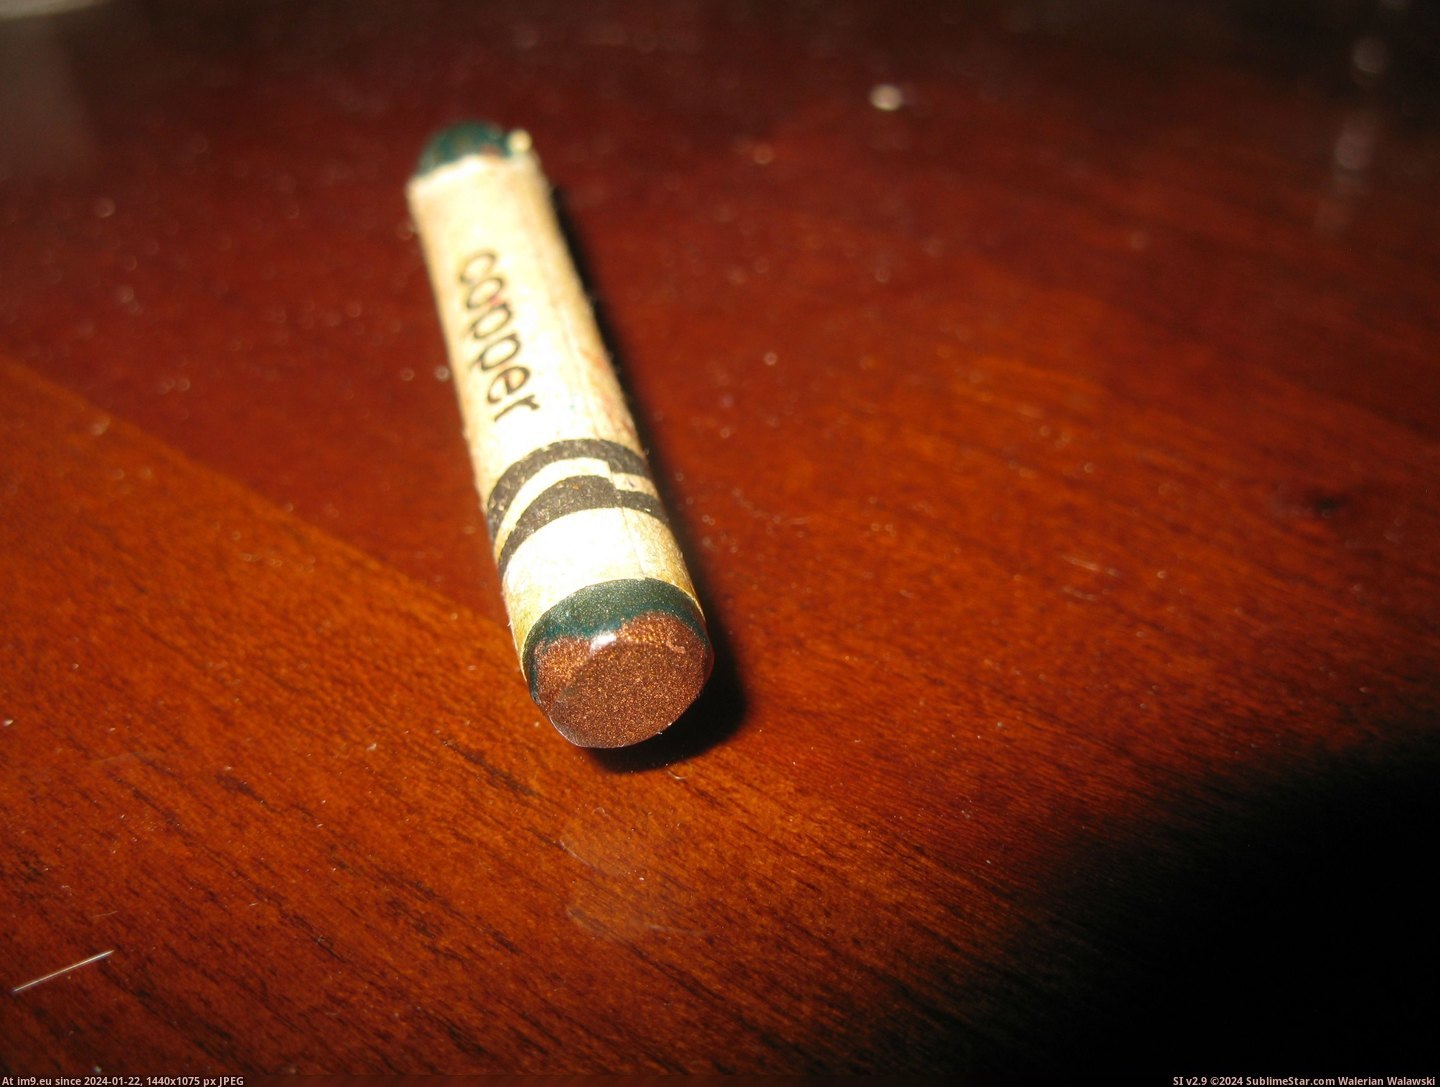 #Old #Can #Green #Copper #Tarnish #Turn #Colored #Crayons [Mildlyinteresting] Copper-colored crayons can actually tarnish and turn green if they're old enough 2 Pic. (Bild von album My r/MILDLYINTERESTING favs))